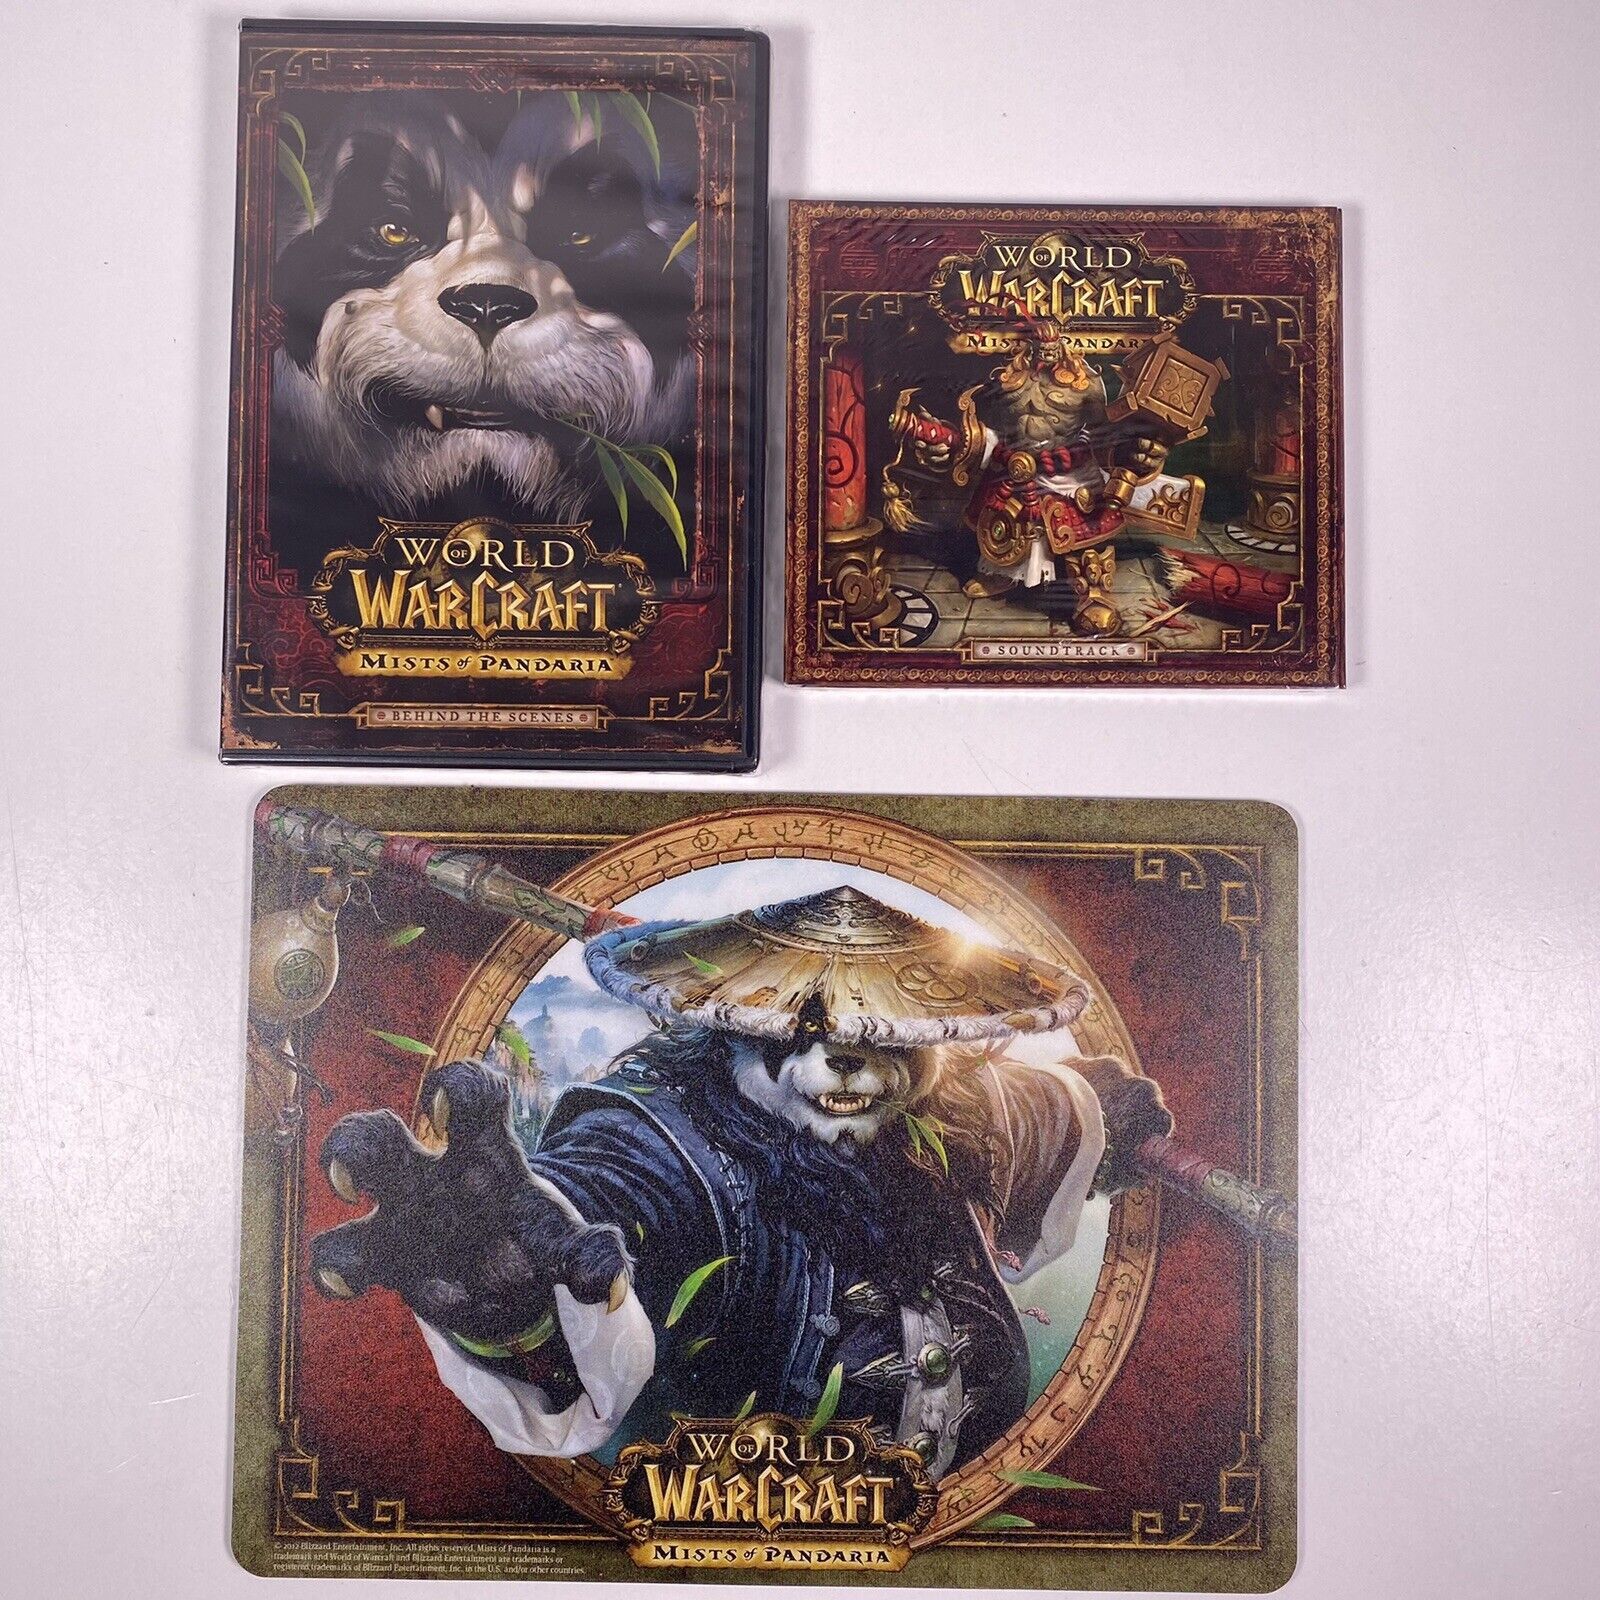 World Of Warcraft Mist Of Pandaria Mouse Pad + Soundtrack + Behind The Scenes - $49.49